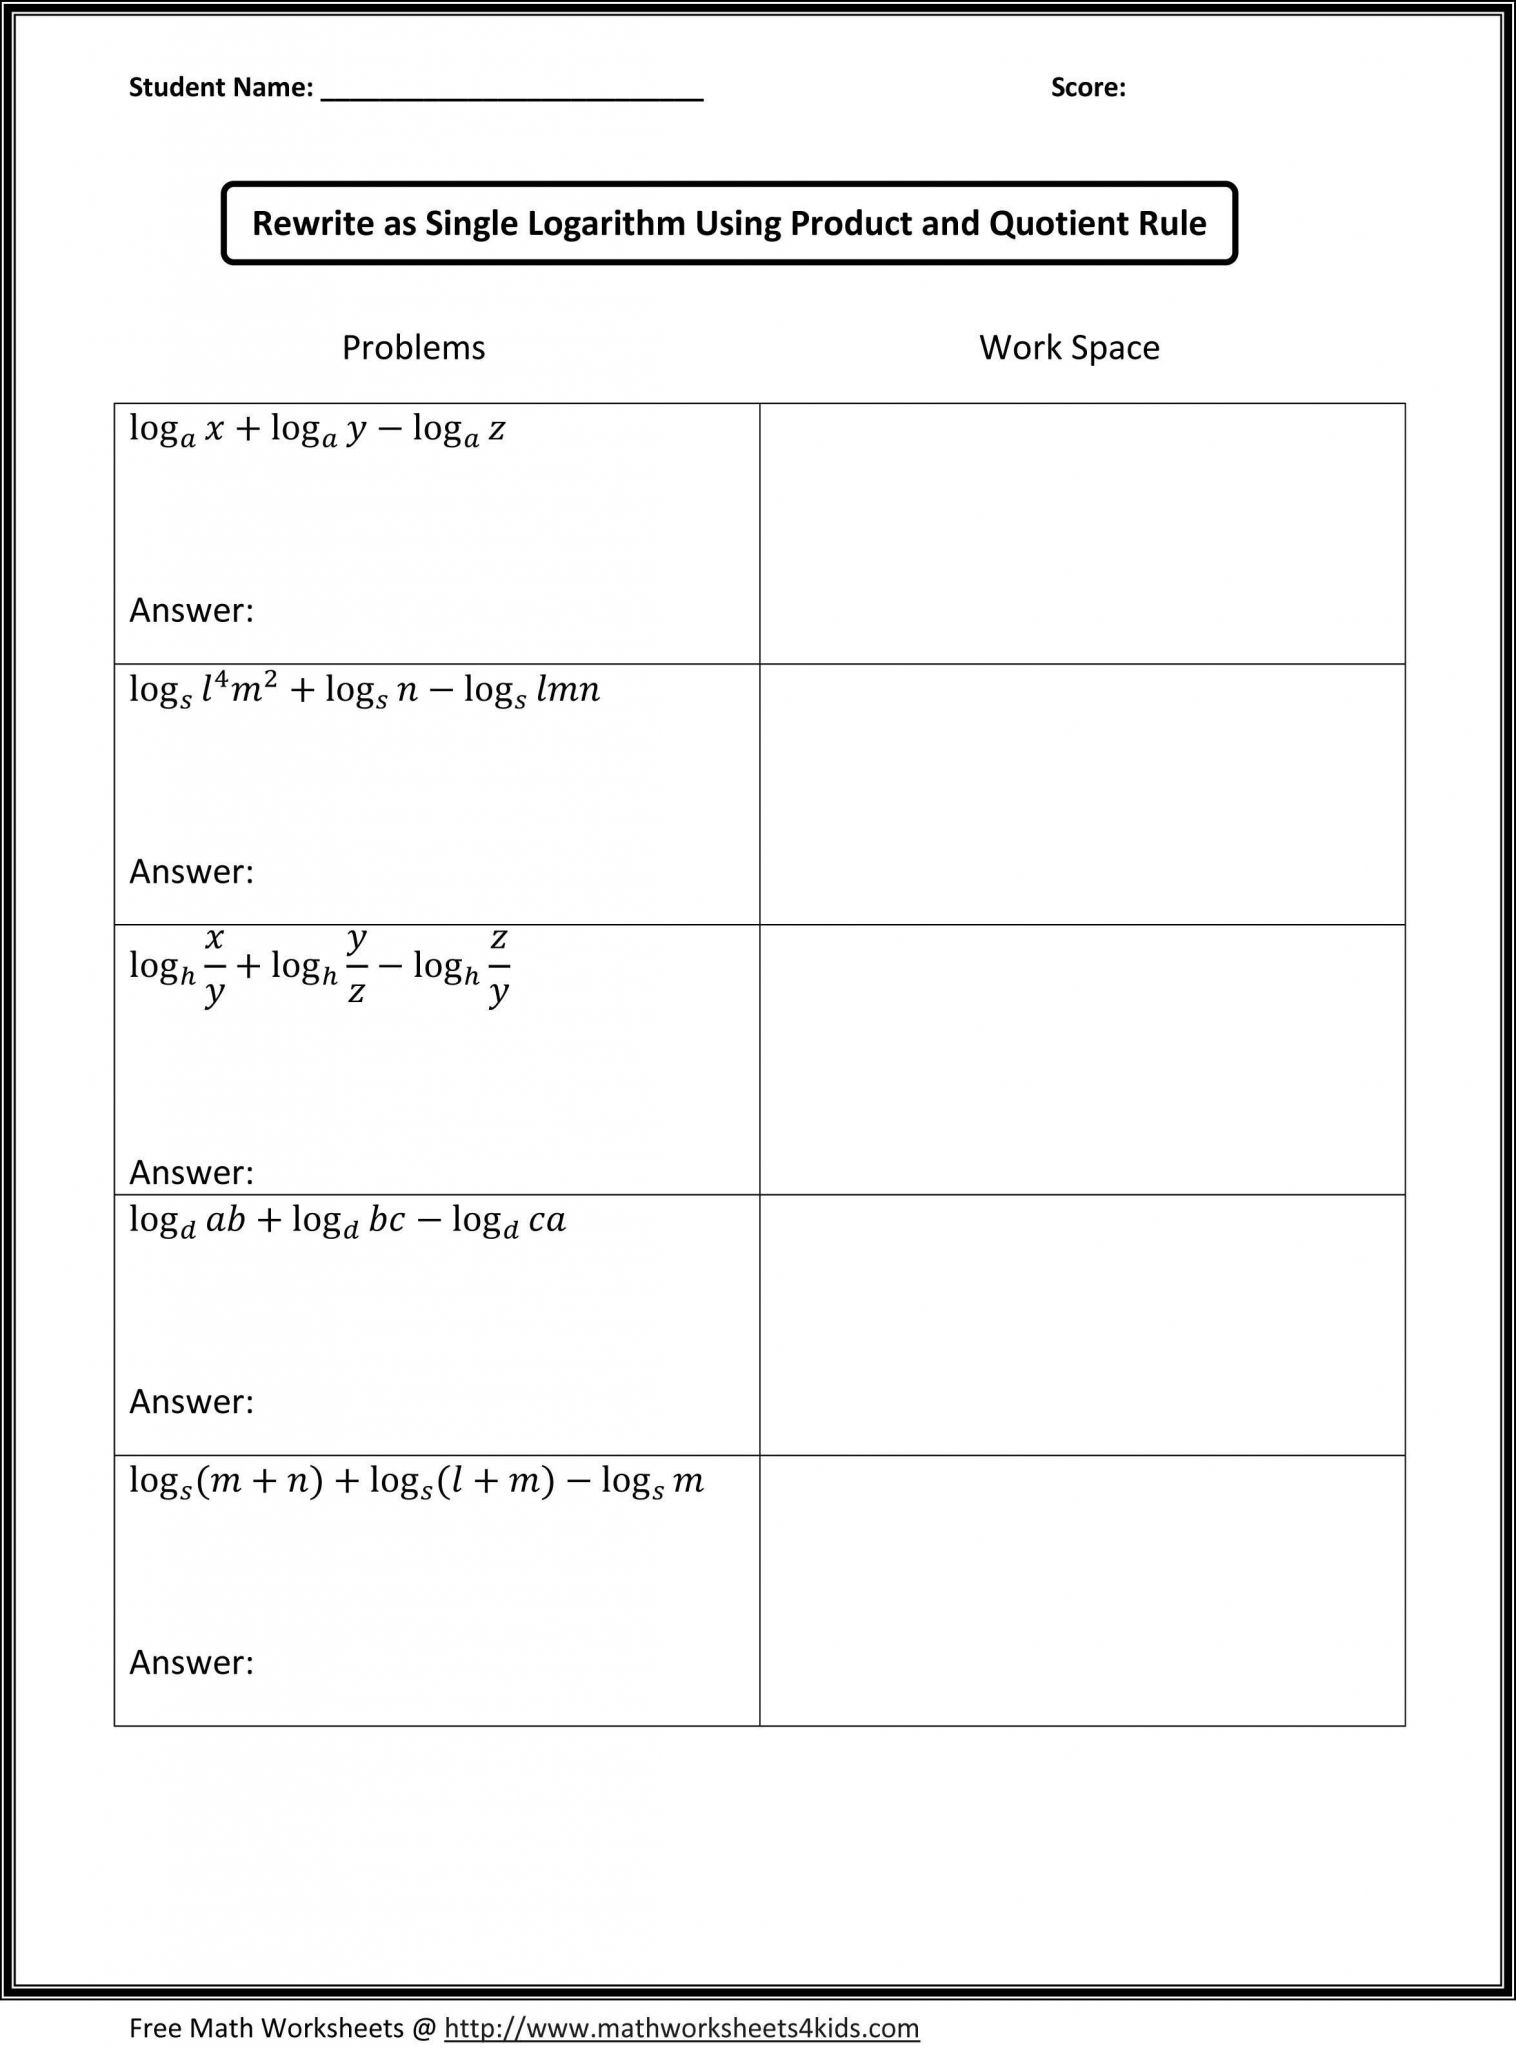 Section 125 Nondiscrimination Testing Worksheet as Well as 40 Luxury Stained Glass Window Linear Equation Worksheet Answers